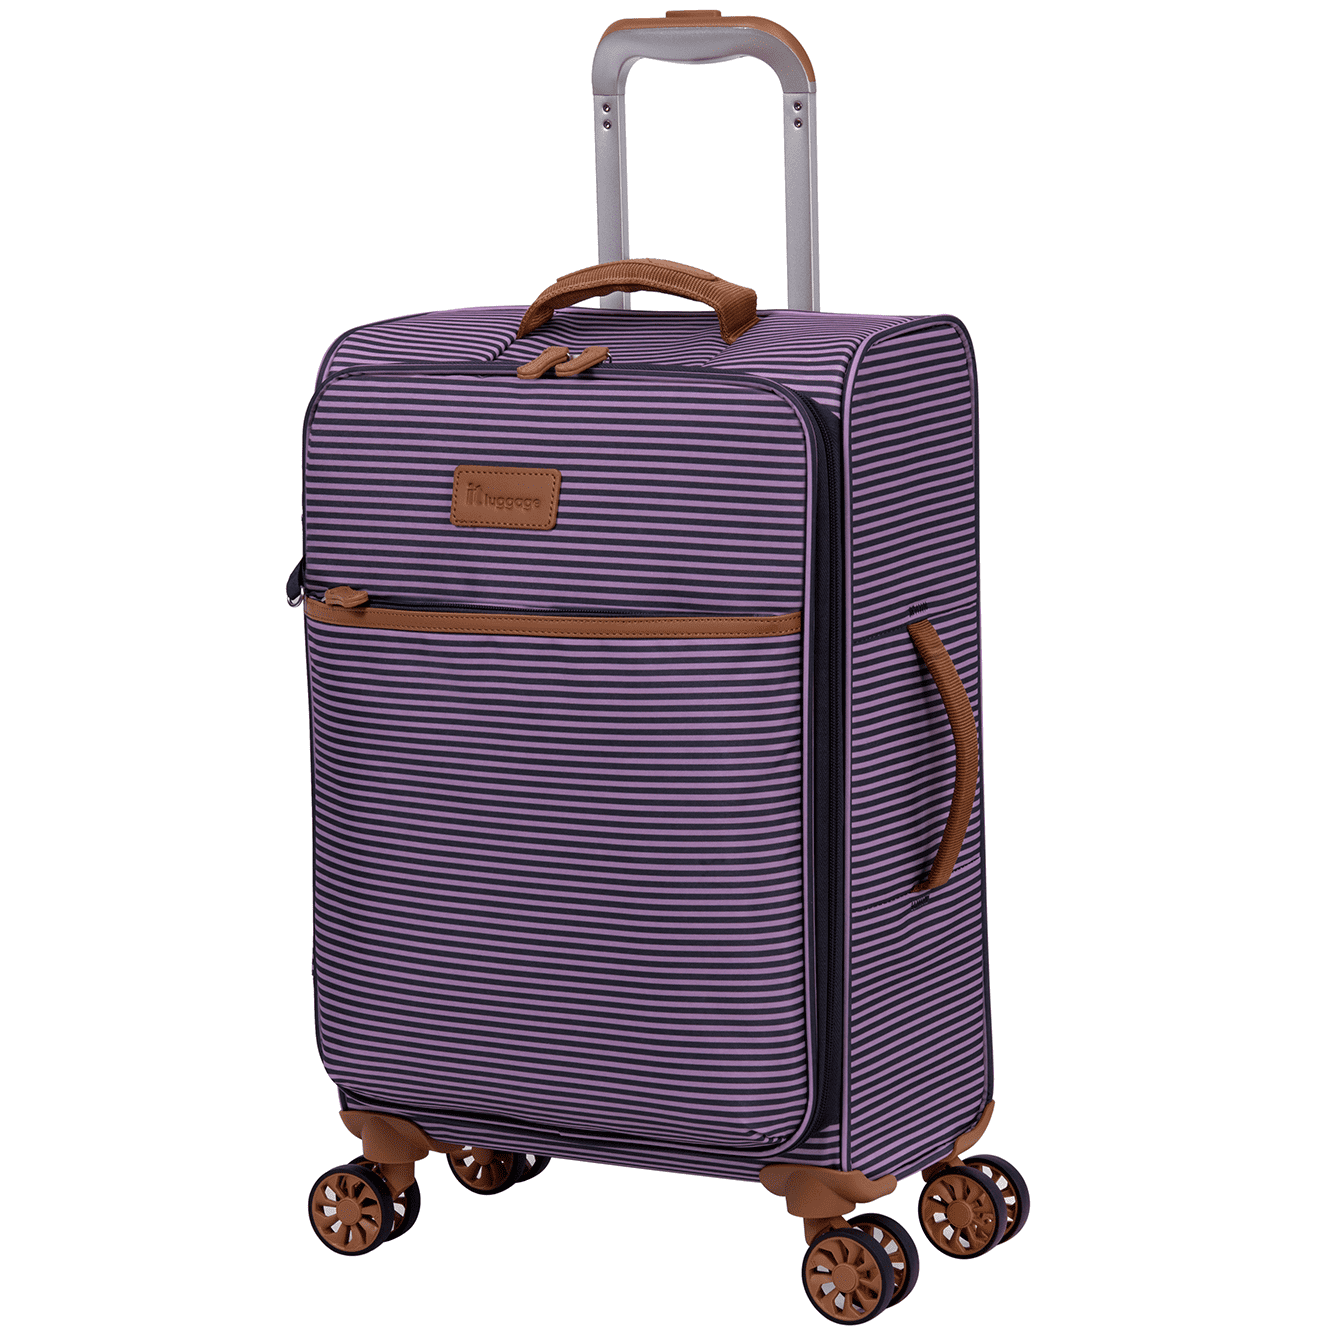 AWAY Travel The CARRY-ON PEARLIZED Color COAST Suitcase Durable A51CST/2